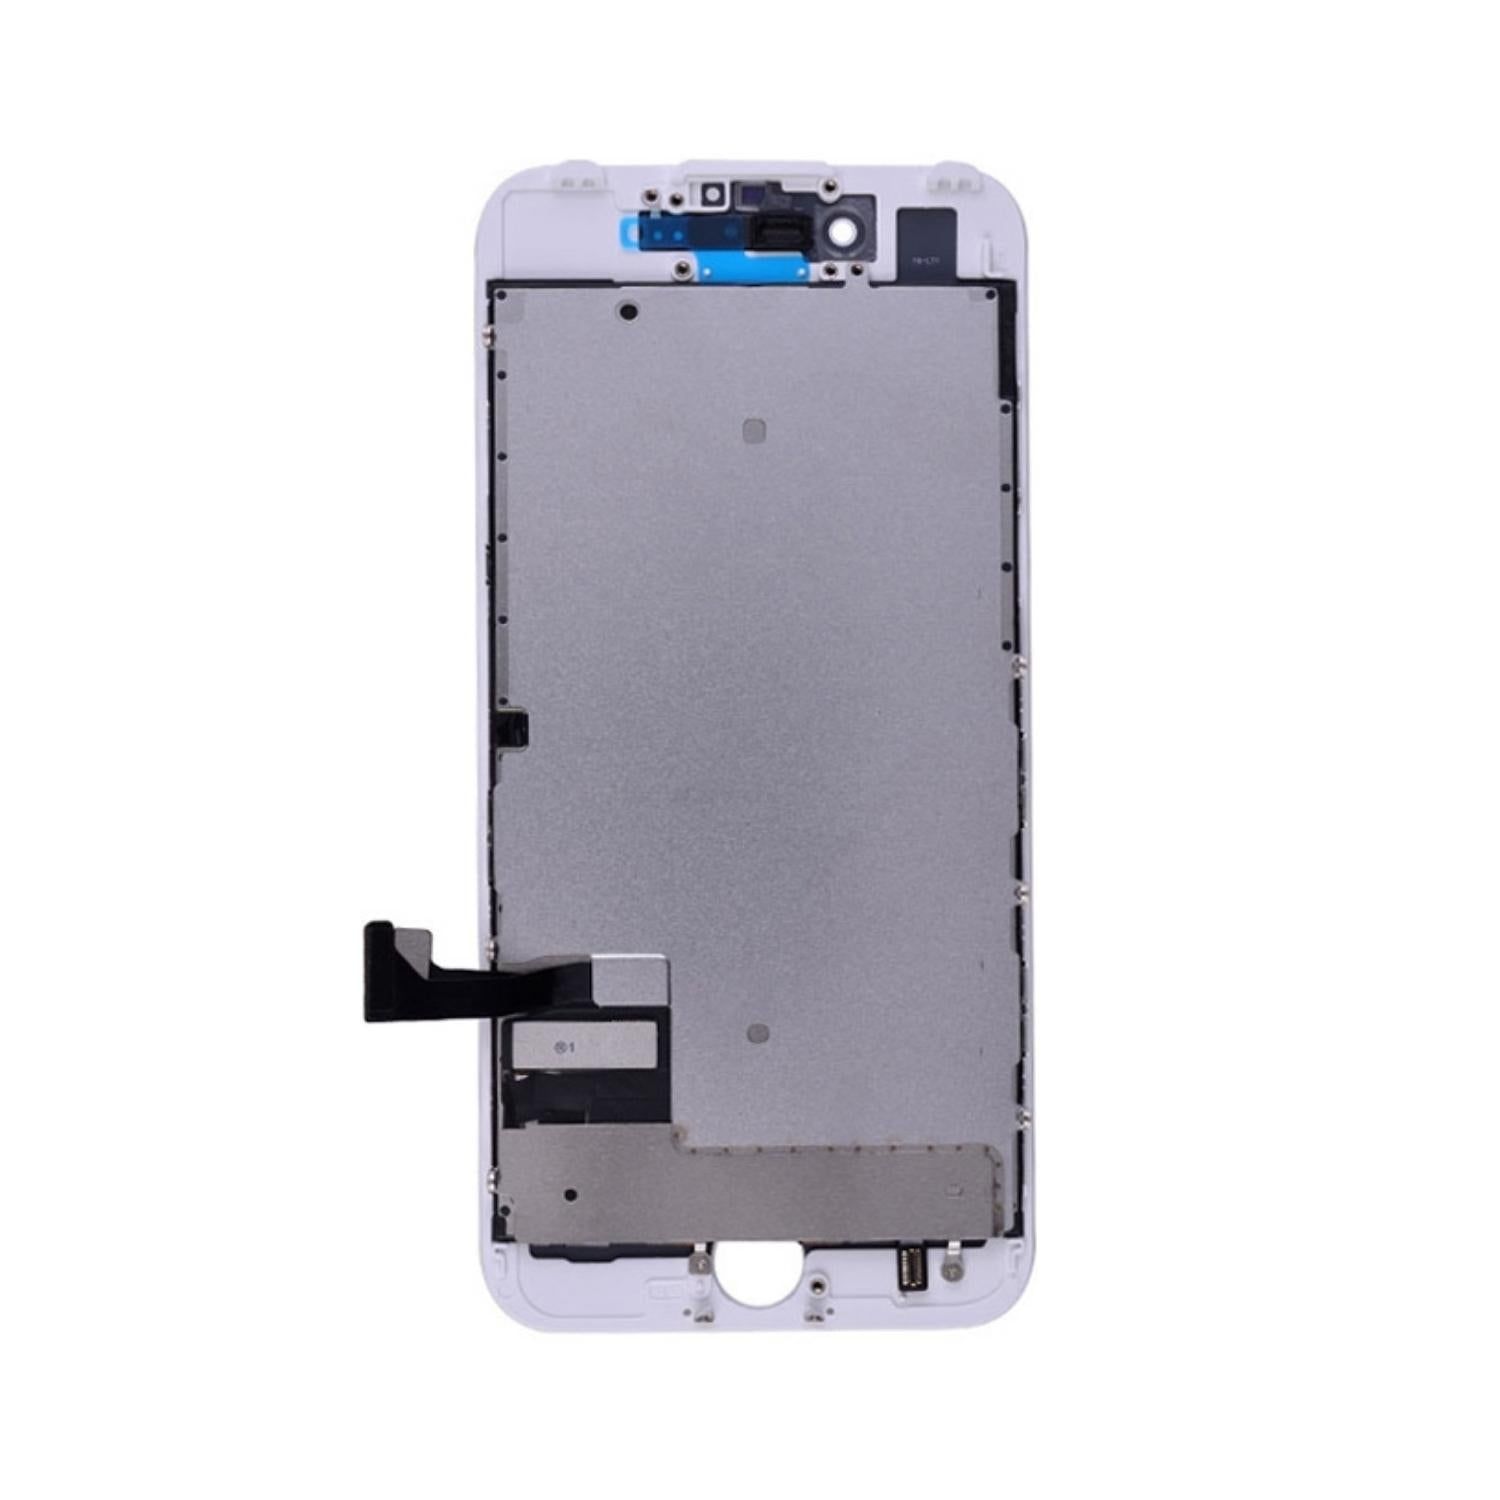 LCD and Digitizer Assembly for iPhone 7 (iQ7 / Incell) White (Breakage Coverage)